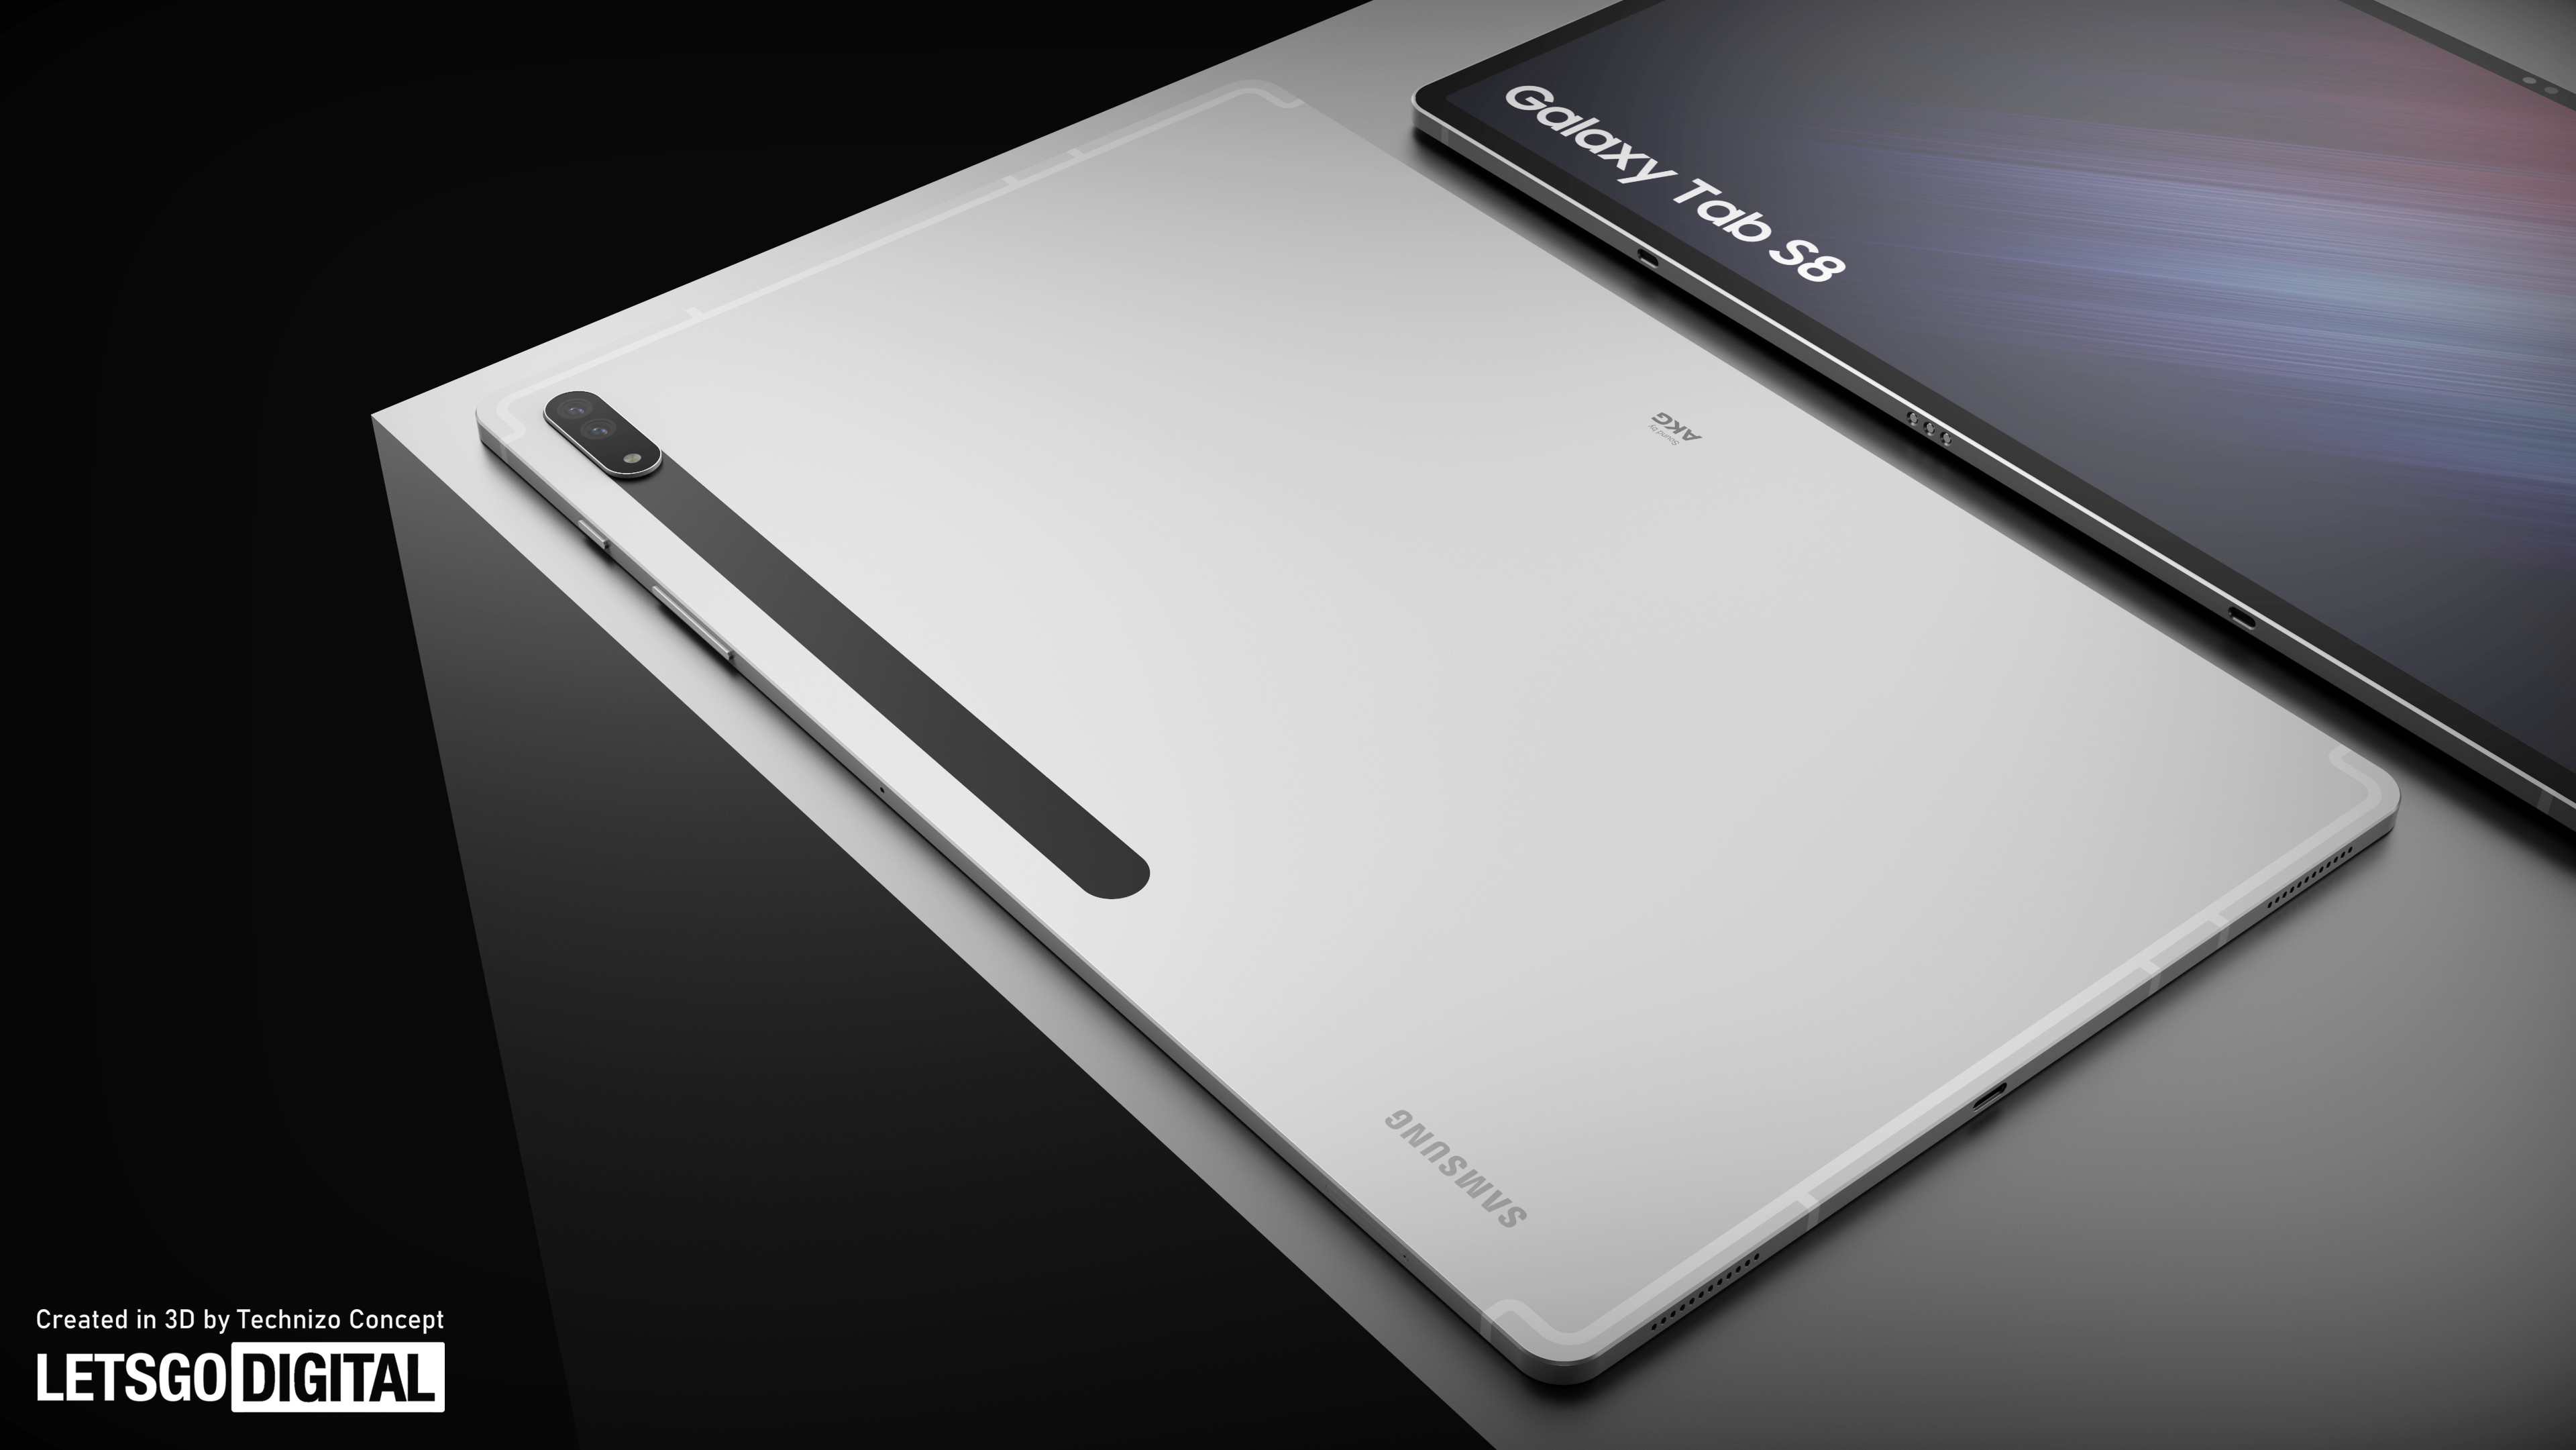 An unofficial render of the back of the Samsung Galaxy Tab S8, in gray